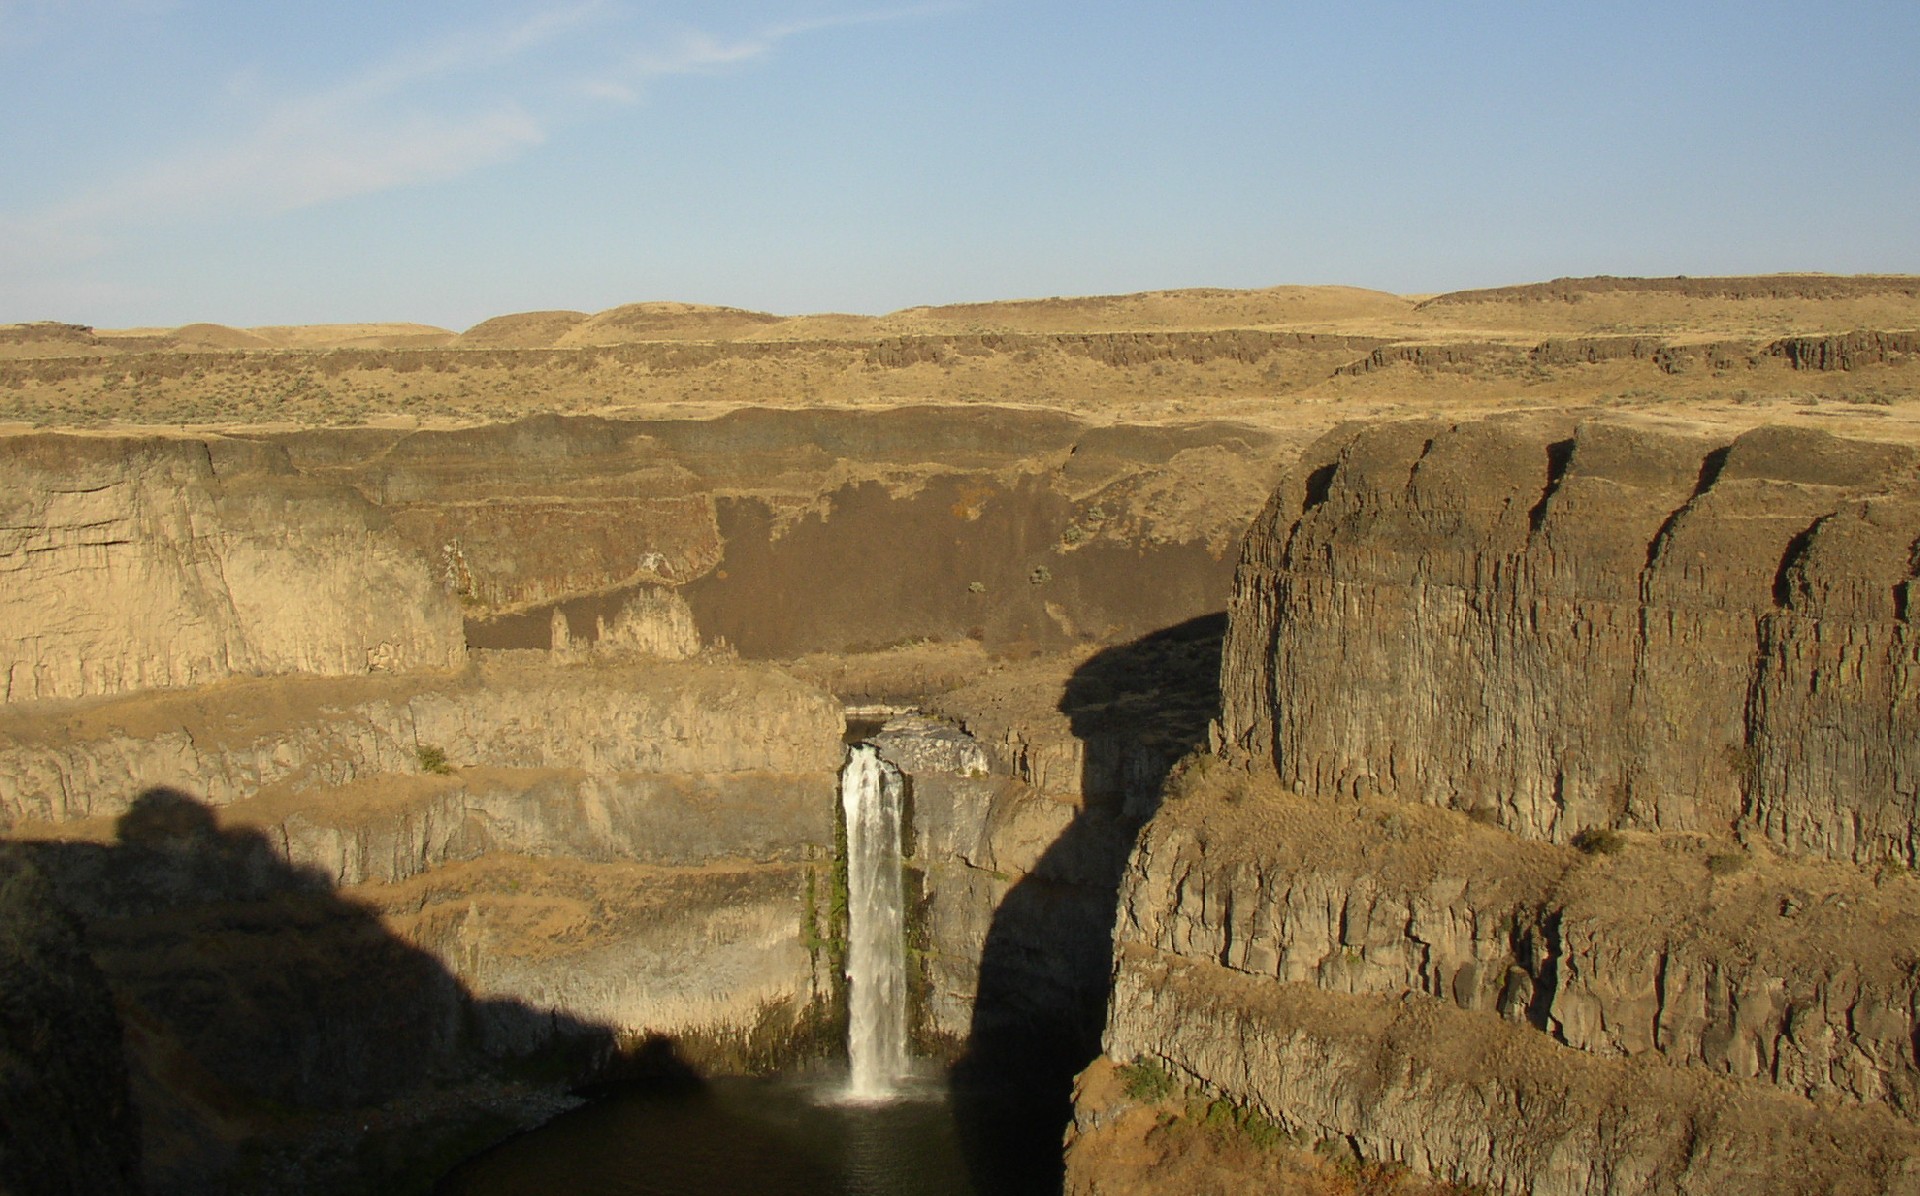 Photograph of Palouse Falls in eastern Washington. Palouse Falls is a tall waterfall that is falling straight down in a canyon. Steep cliffs with occasional ledges form the sides of the canyon. The landscape appears very dry with yellow vegetation. 